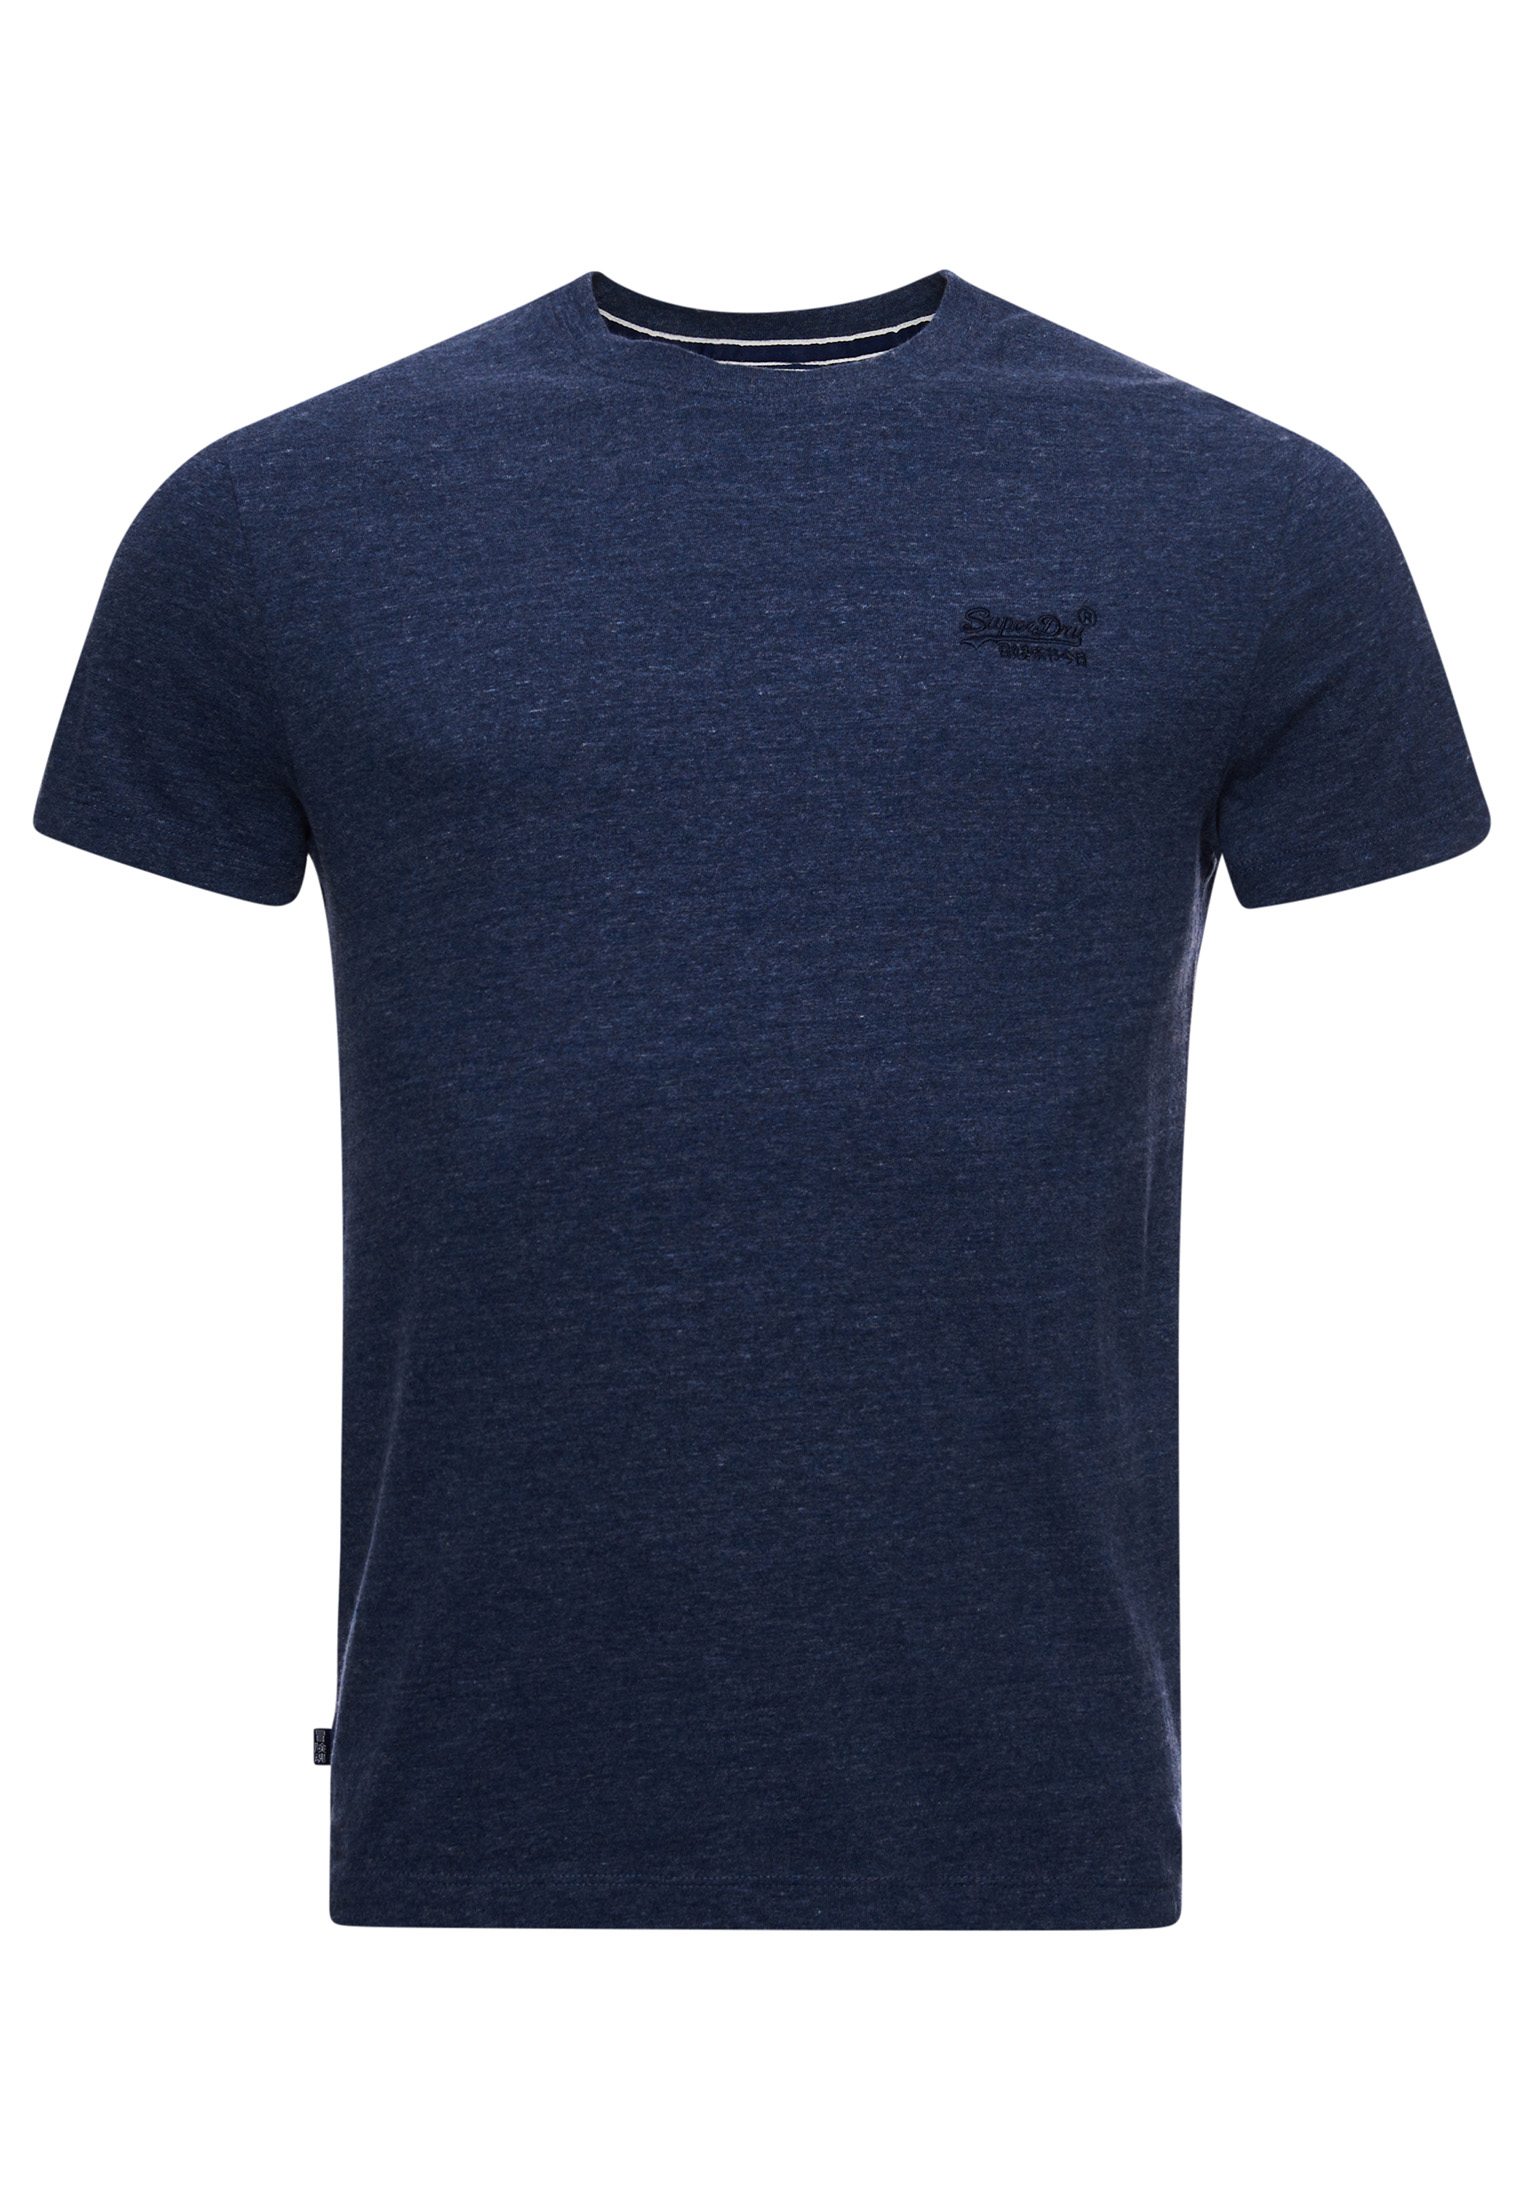 Superdry Shirt in Navy 